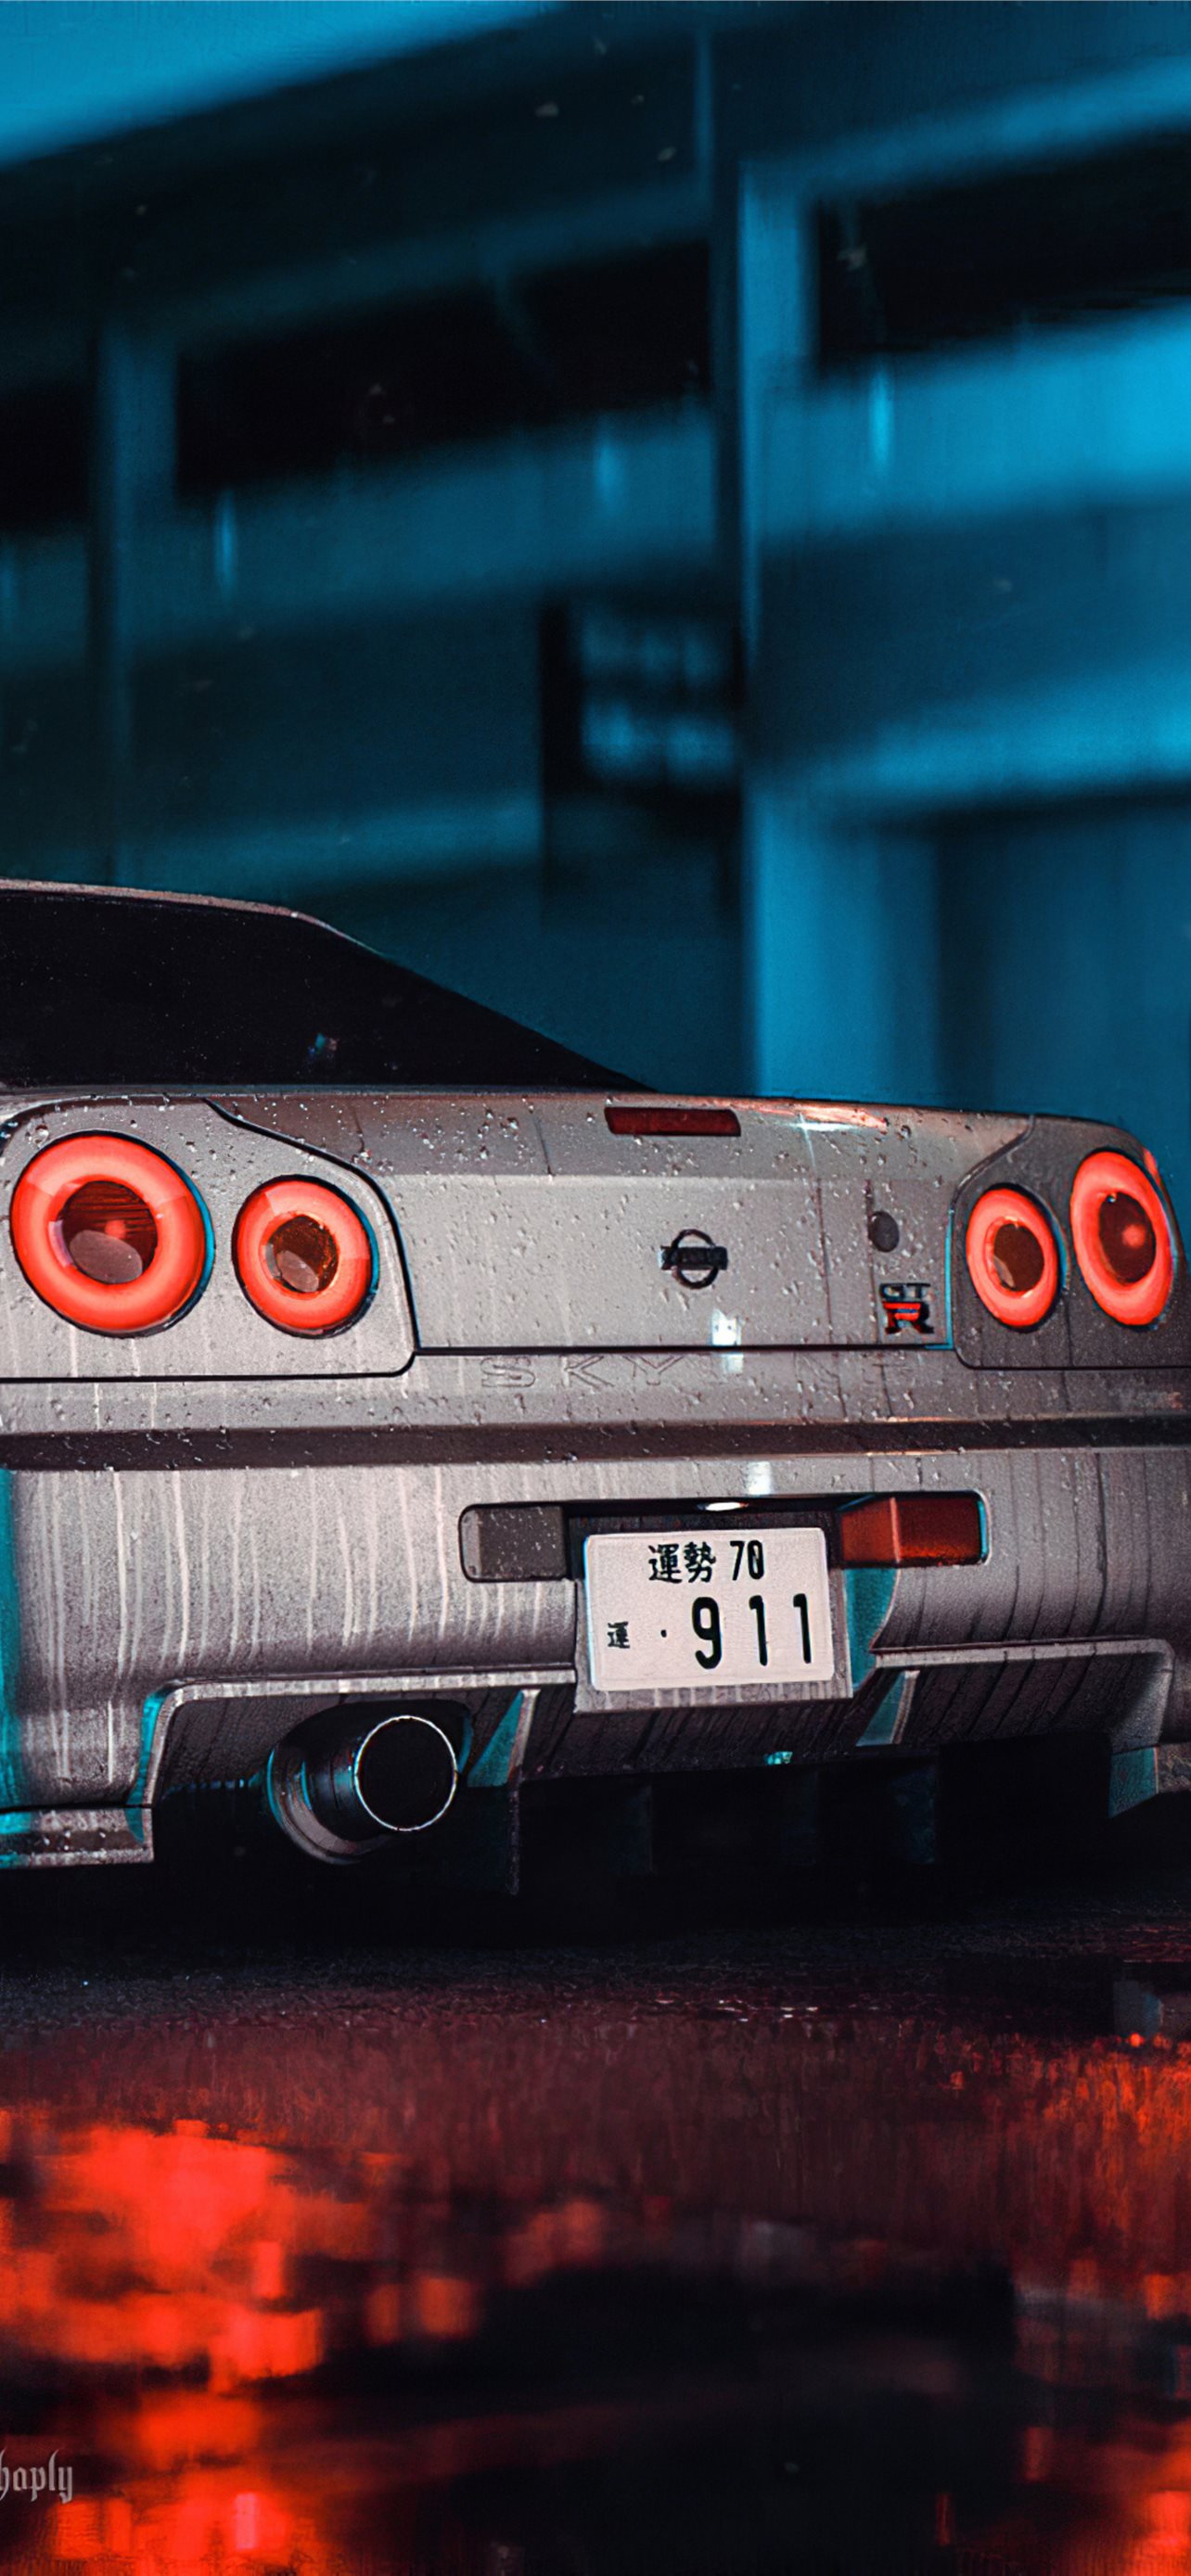 Nissan Skyline Gt R R32 Iphone Wallpapers Free Download